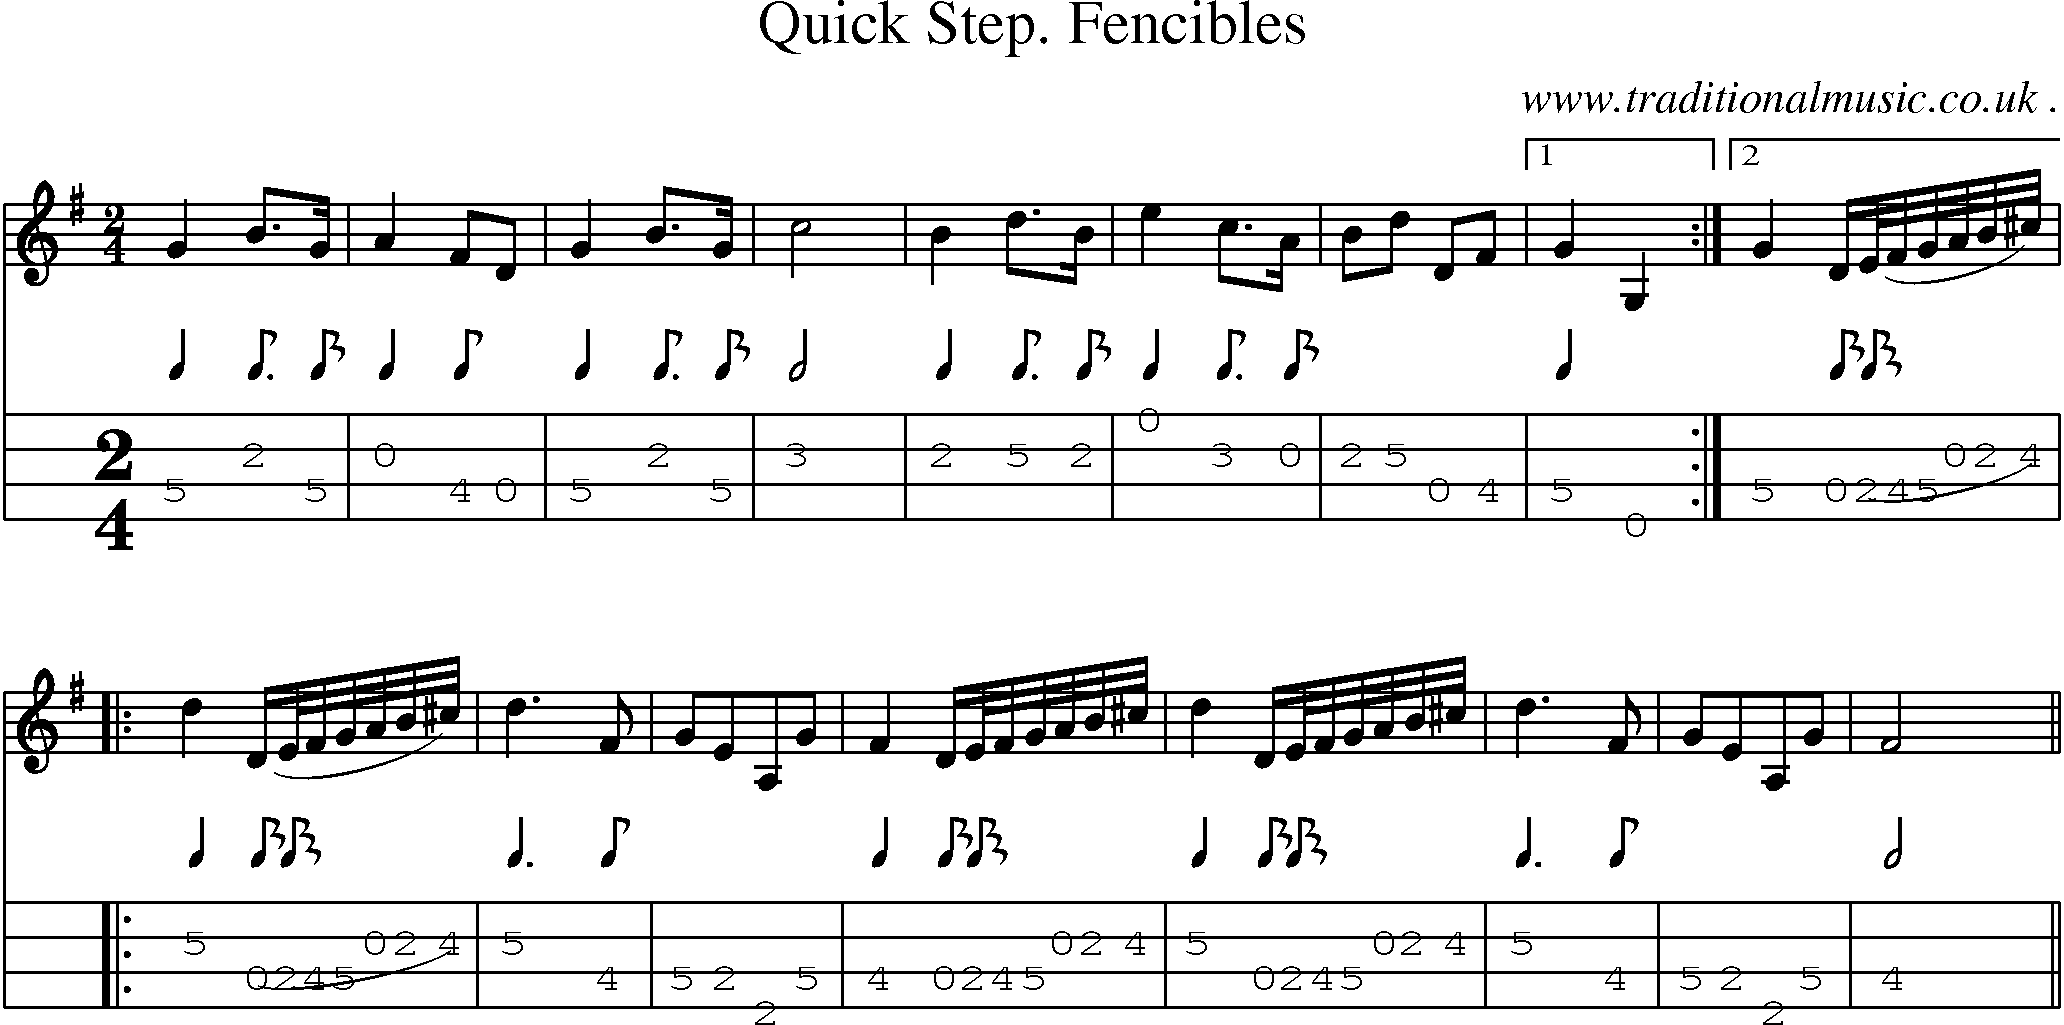 Sheet-music  score, Chords and Mandolin Tabs for Quick Step Fencibles